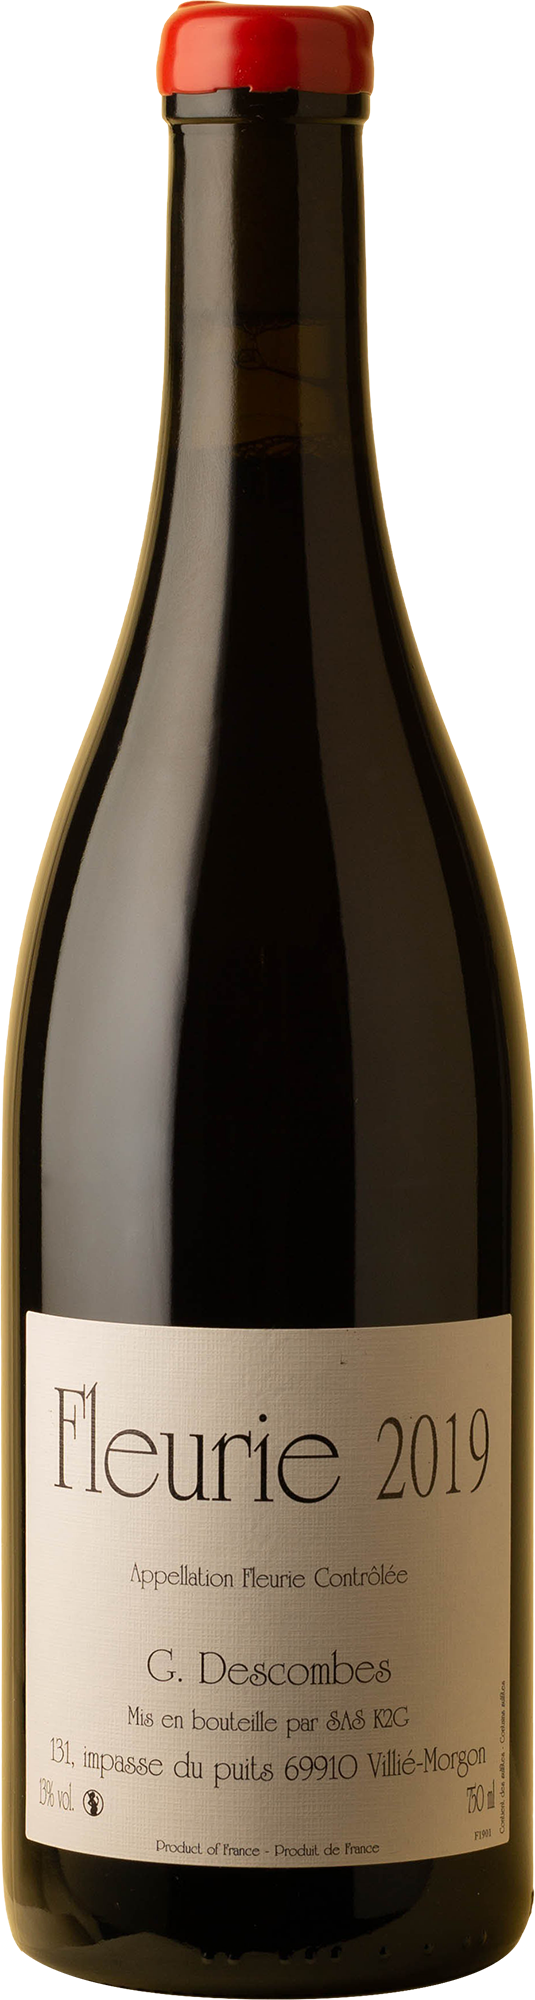 Georges Descombes - Fleurie Vieilles Vignes Gamay 2019 Red Wine